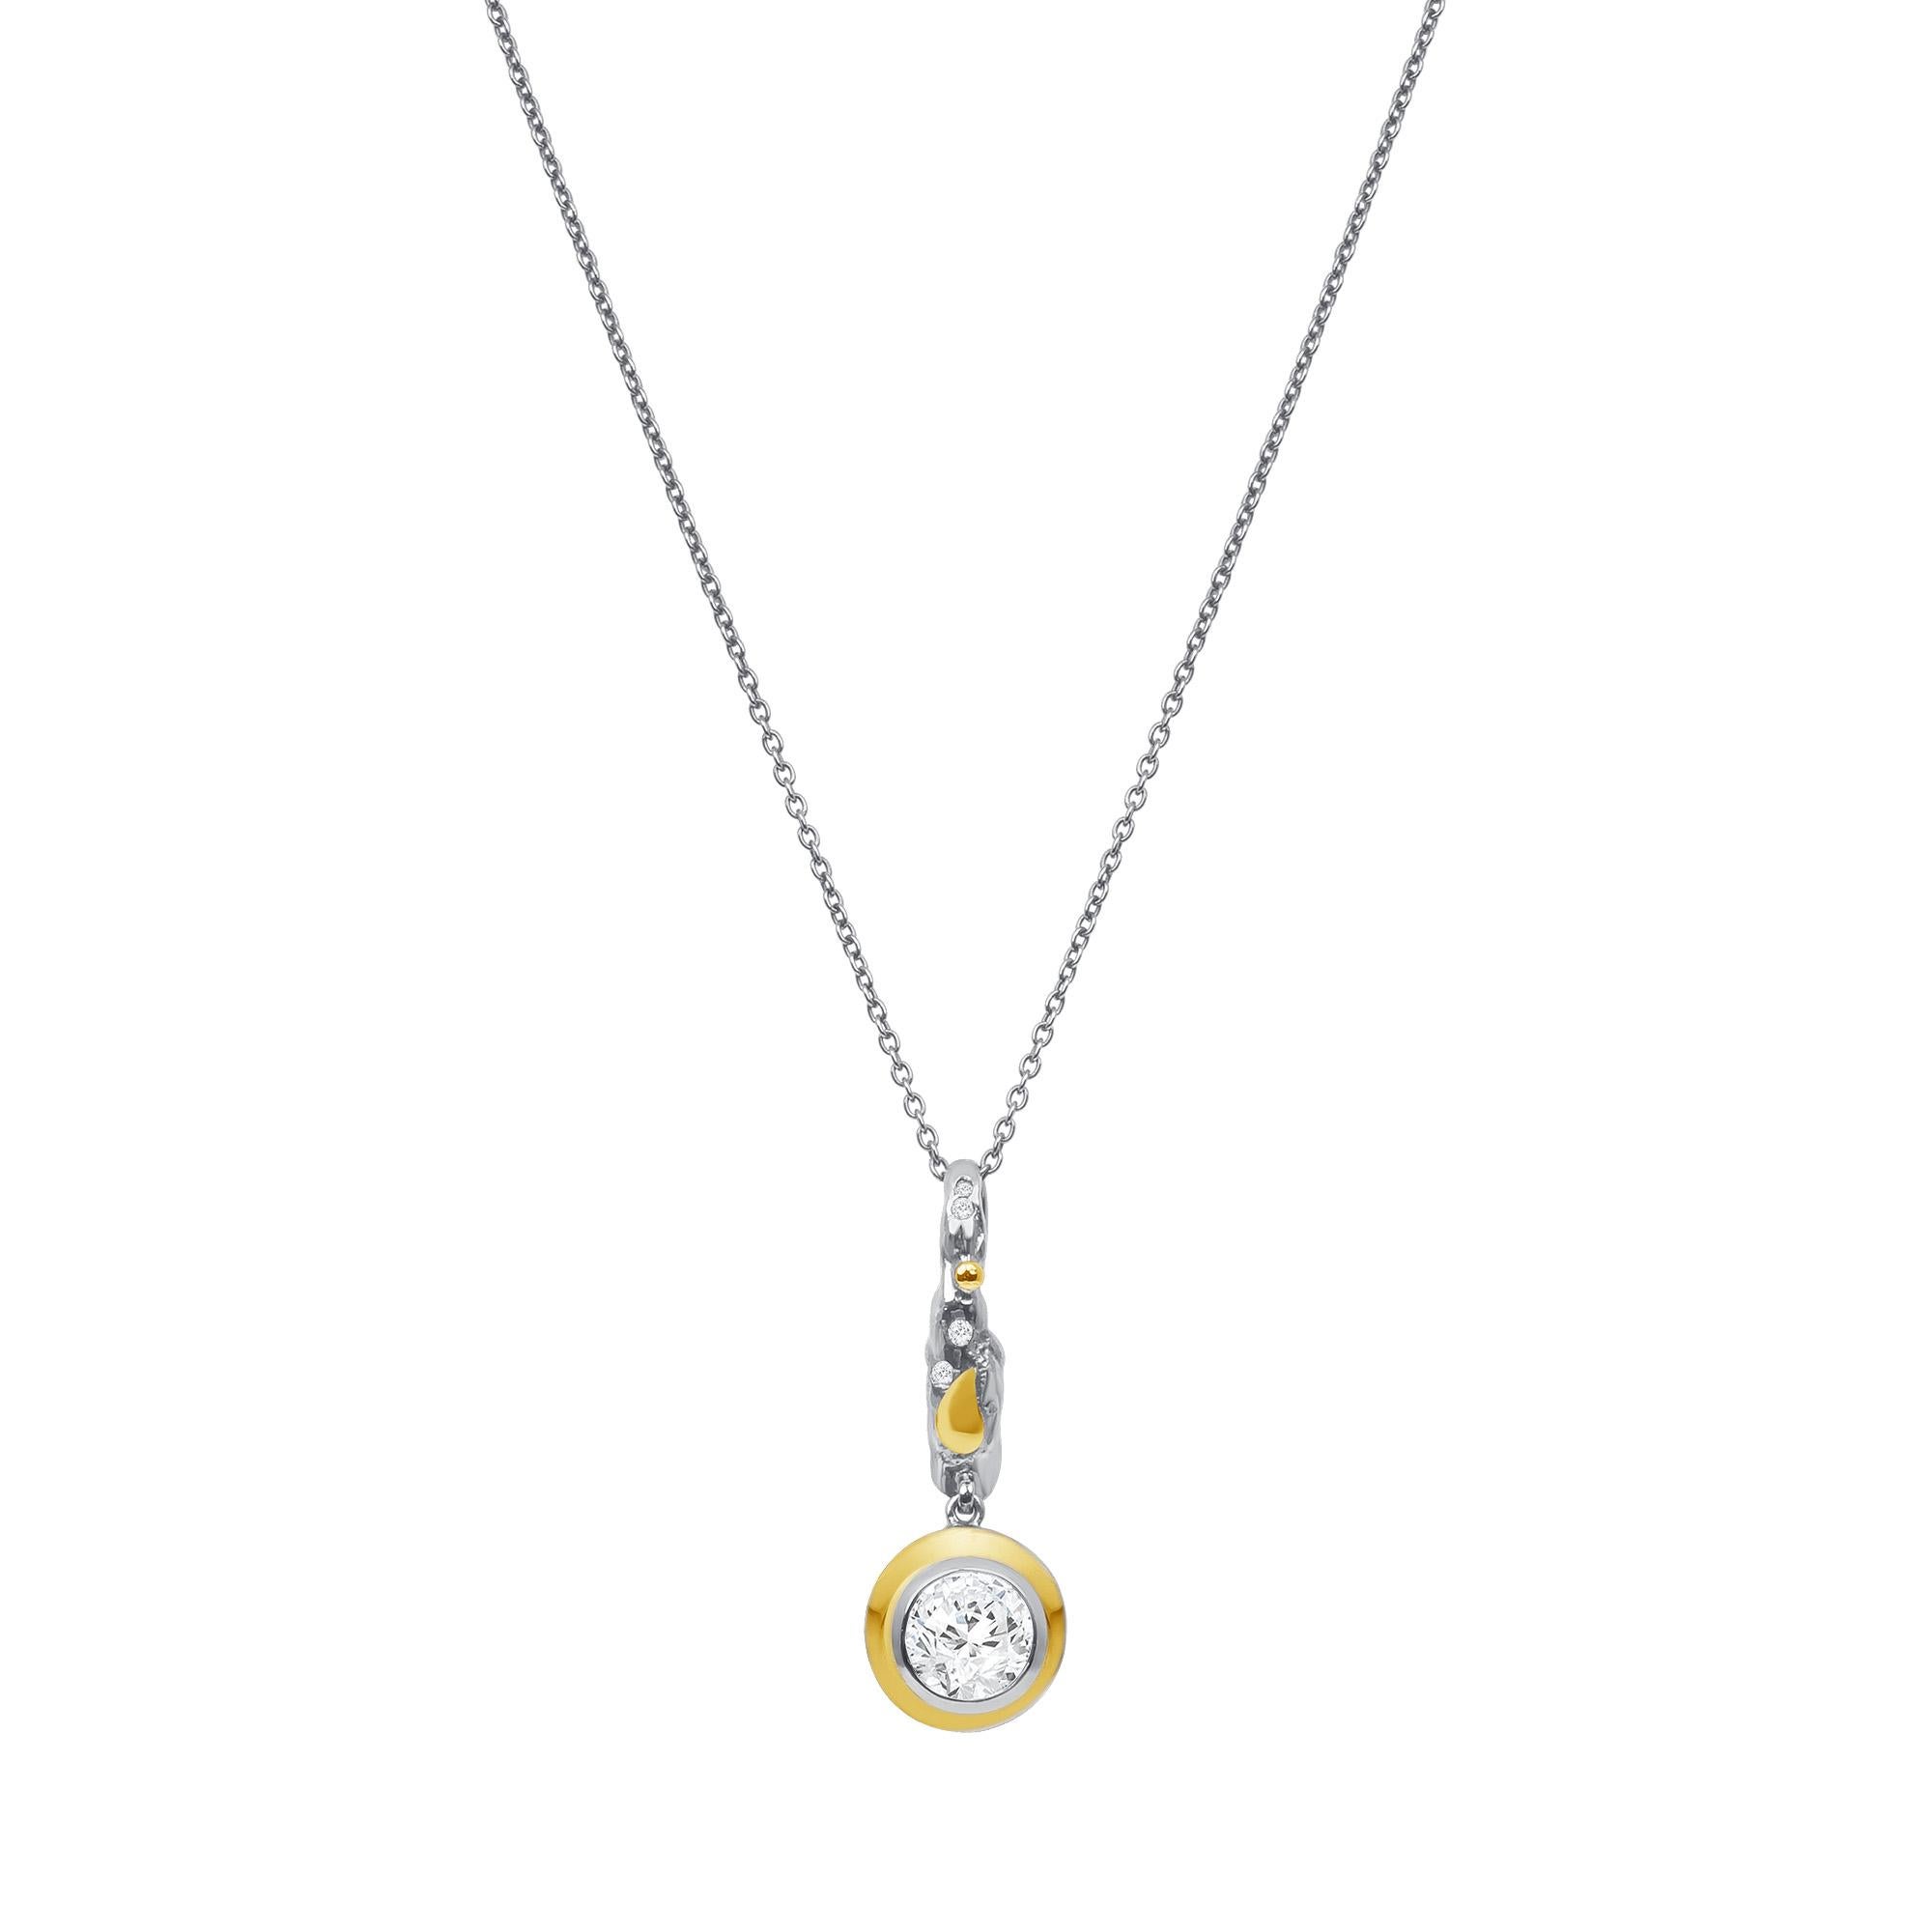 4.13 Carat White Topaz Diamond Oxidized Sterling Silver 18k Yellow Gold Pendant Necklace, In Stock.

This white topaz and diamond drop pendant is made out of 4.13 total carat weight of white topaz and 0.21 total carat weight of diamonds. The white